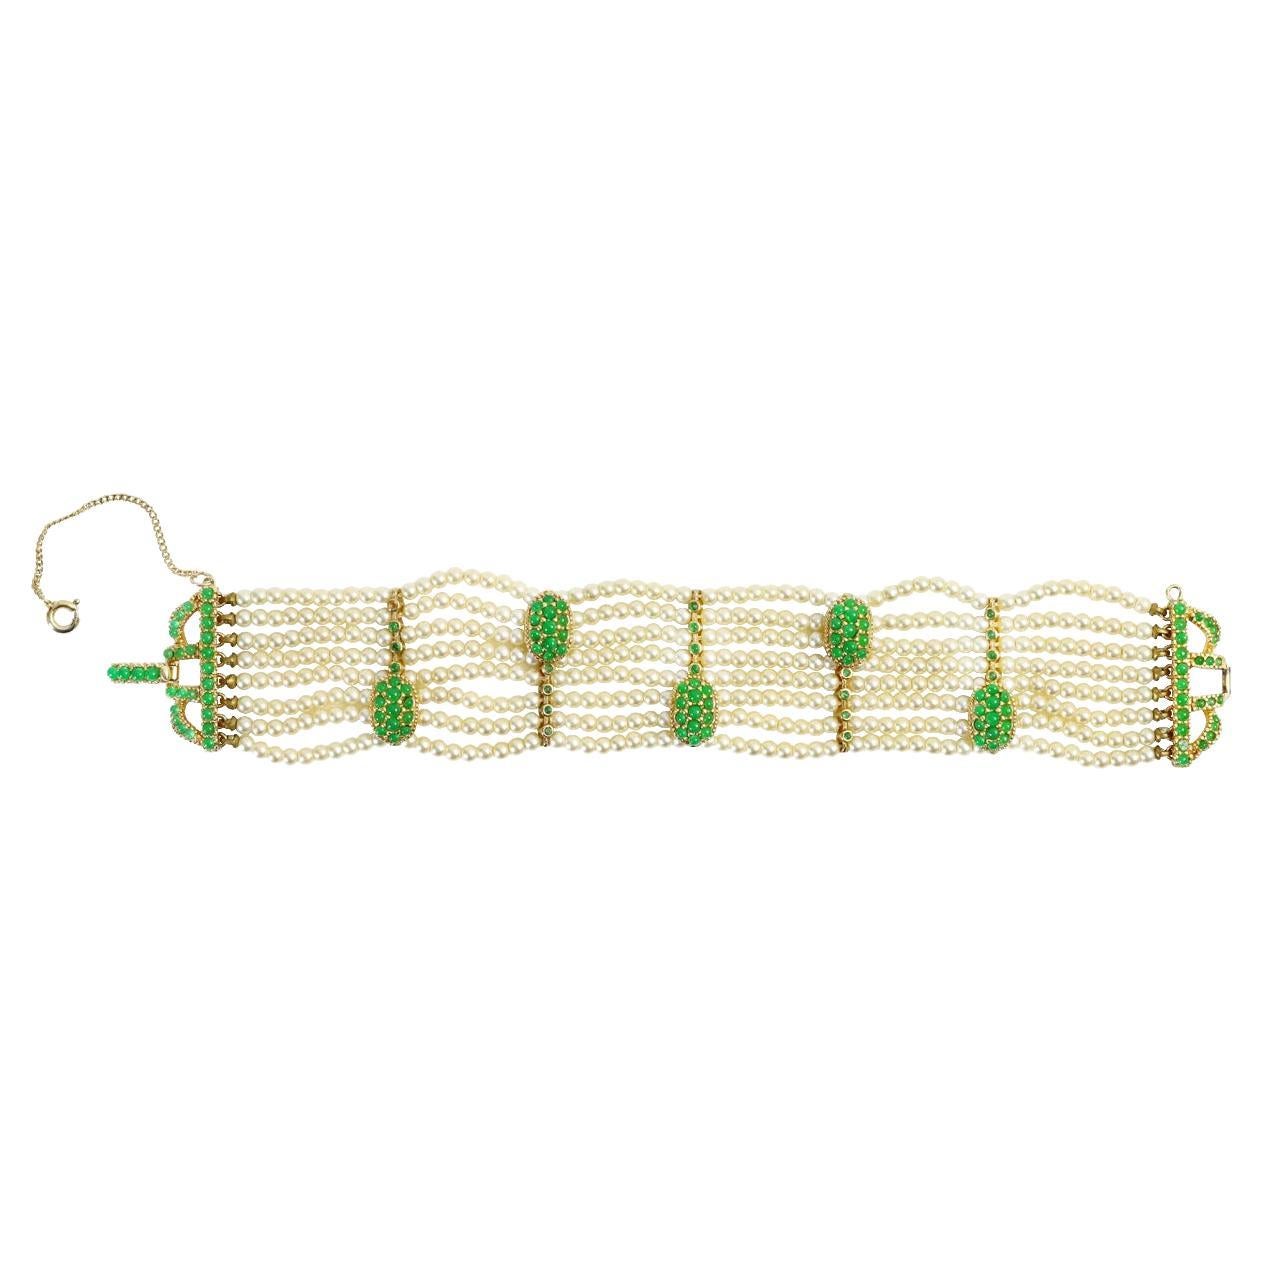 Vintage Faux Pearl With Gold and Green Bead Accent  Bracelet Circa 1980s For Sale